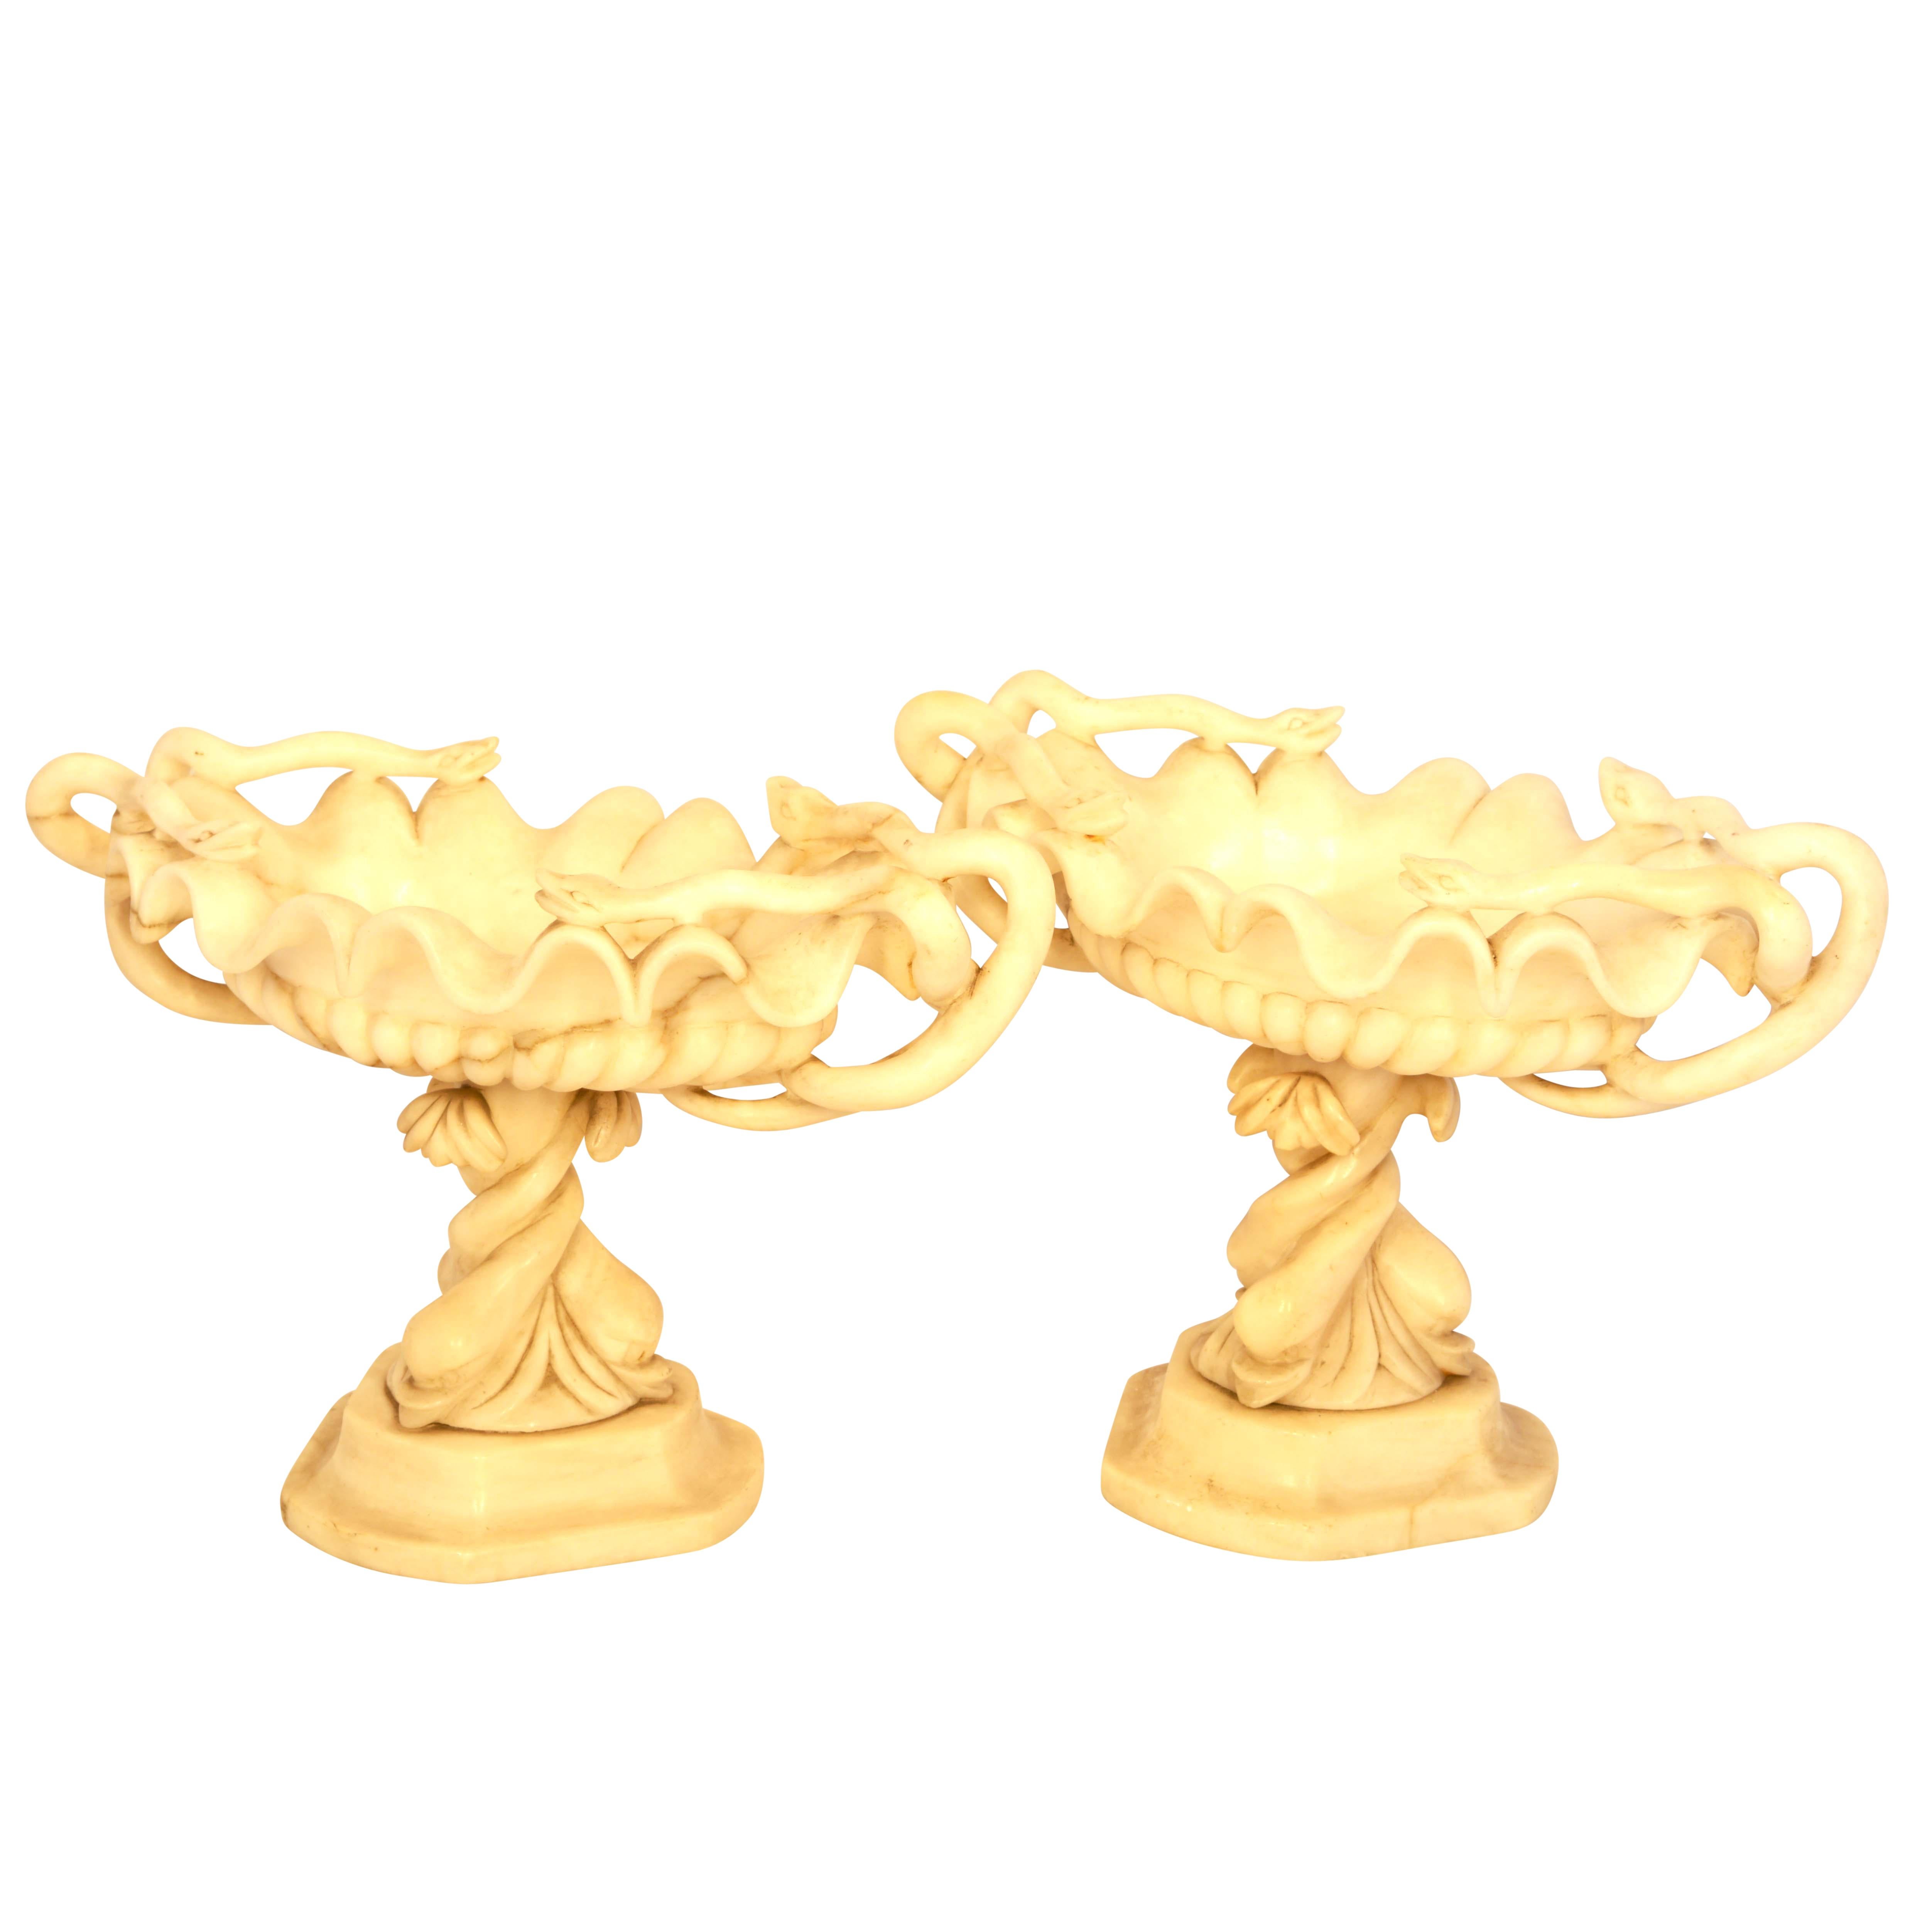 Louis XV Antique Alabaster Tazza with Snake Handles Pair For Sale